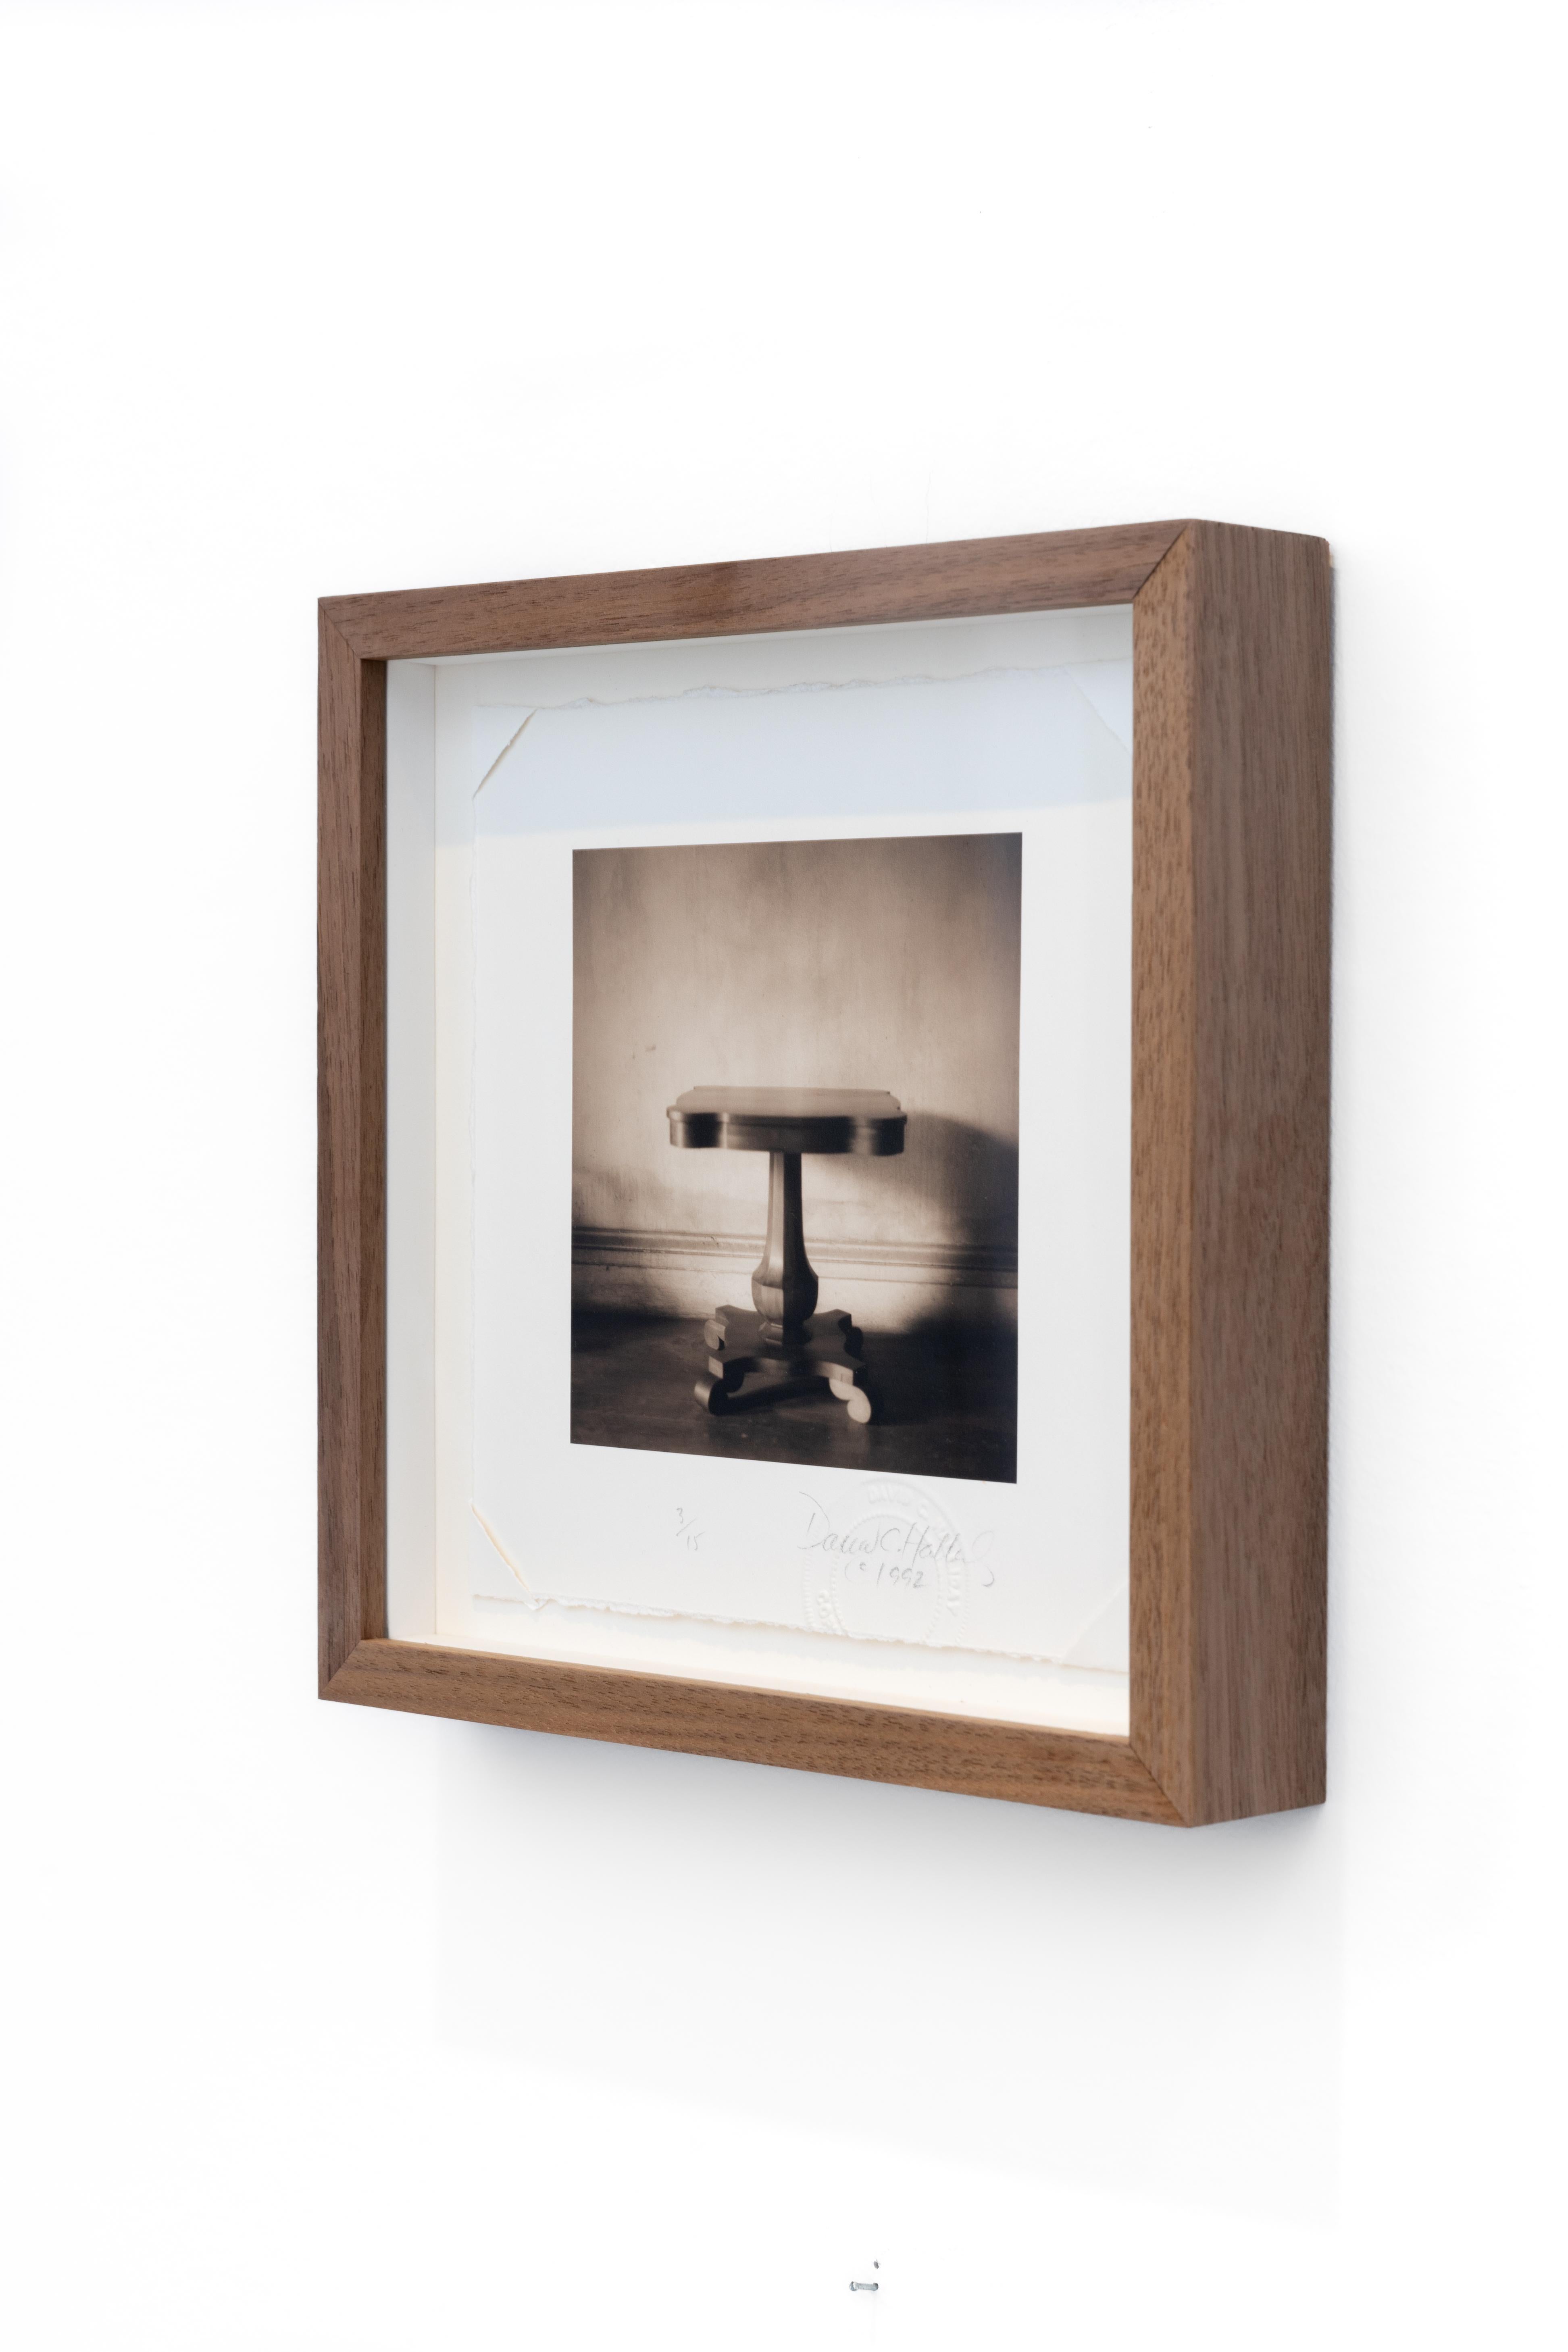 Square Table (Contemporary Sepia Toned Still Life Photograph of Antique Table) - Brown Still-Life Photograph by David Halliday